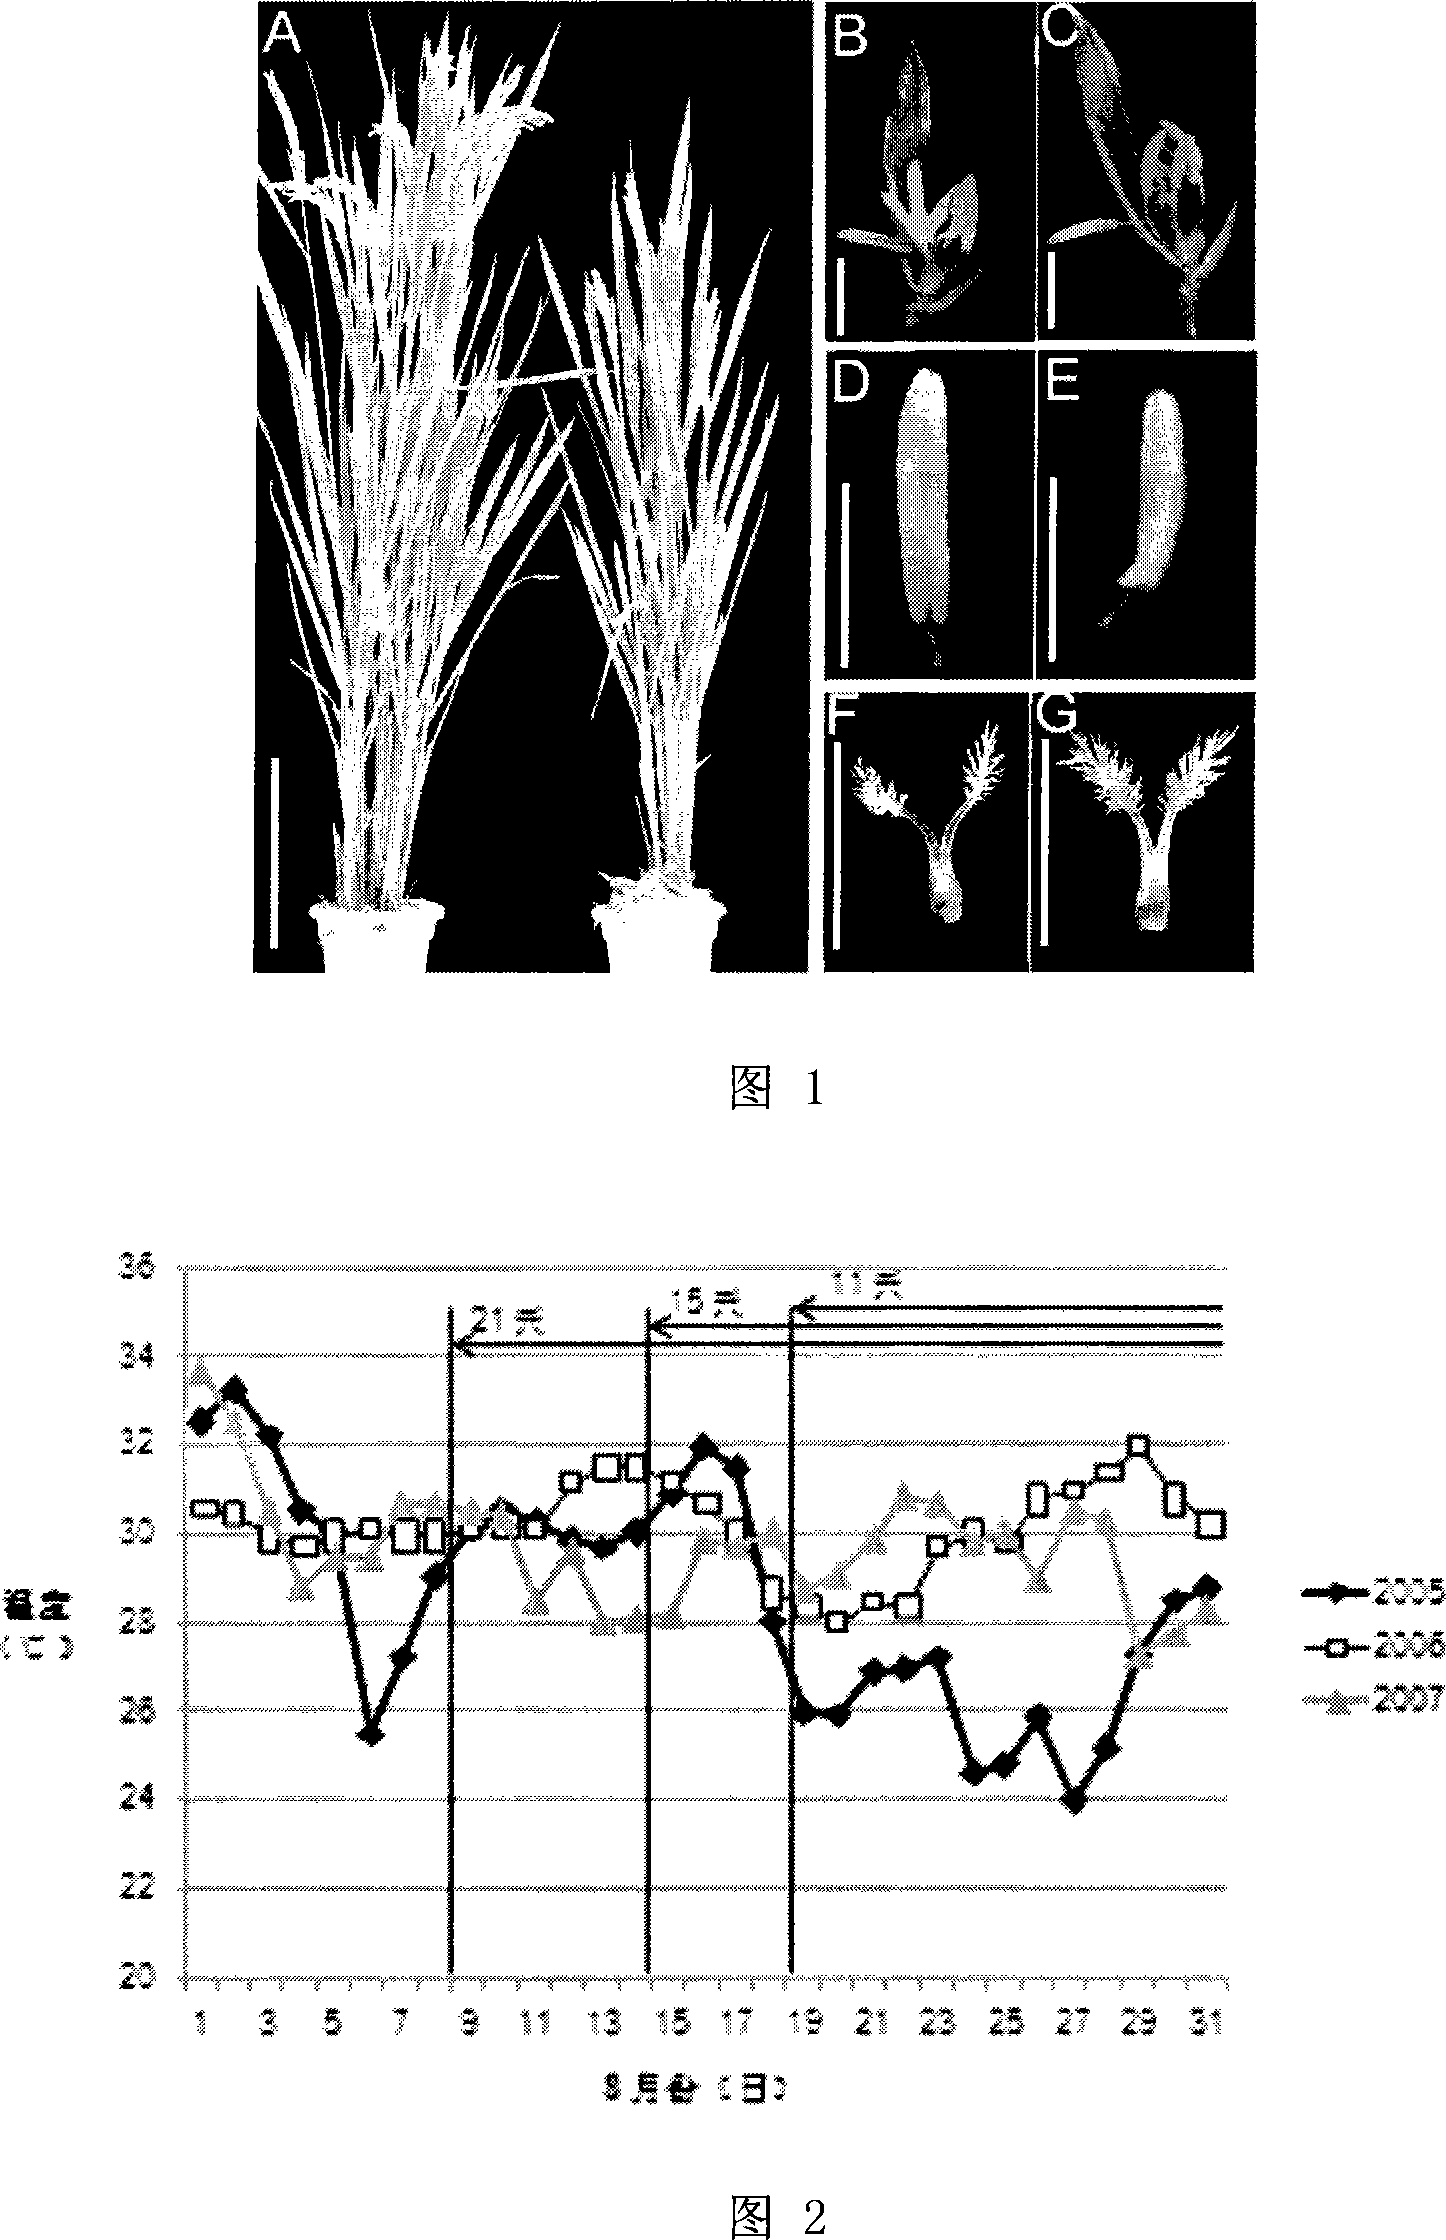 Protein coded sequence for regulating and controlling temperature and light sensitive nuclear sterility